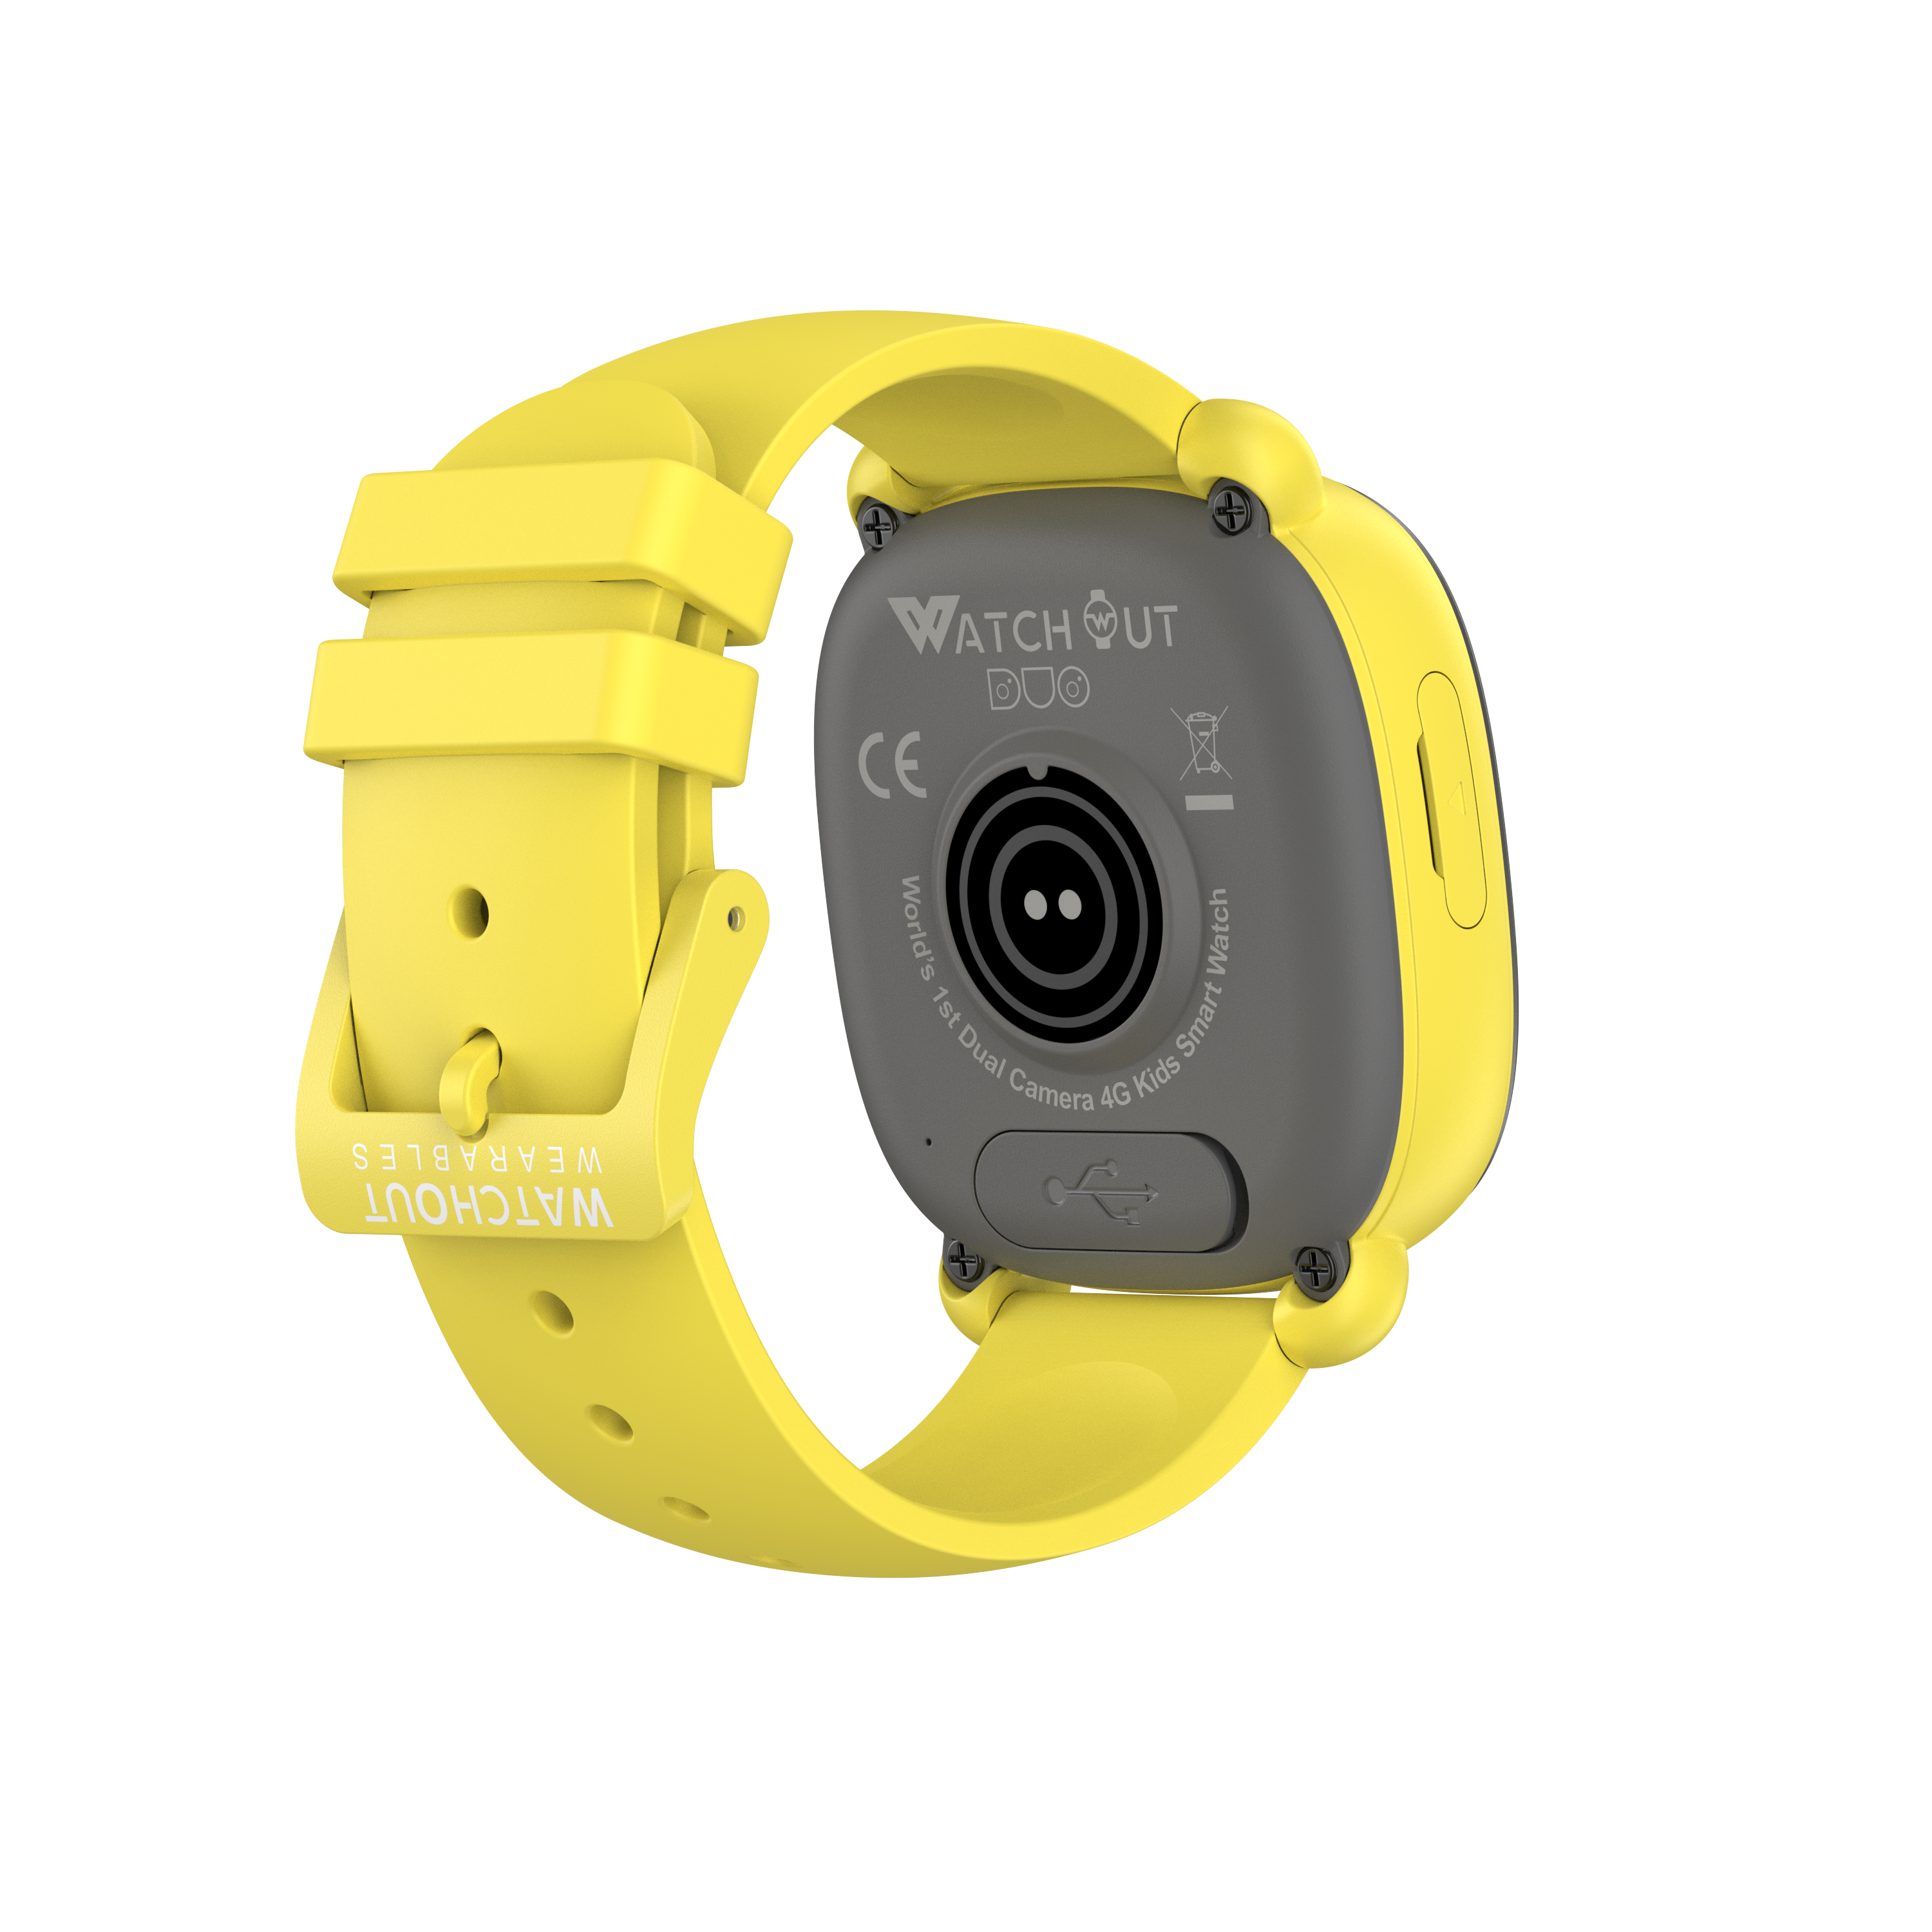 WatchOut Duo Kids Smart Watch with GPS Tracking, Video Call, SOS and Dual Camera (Hello Yellow)